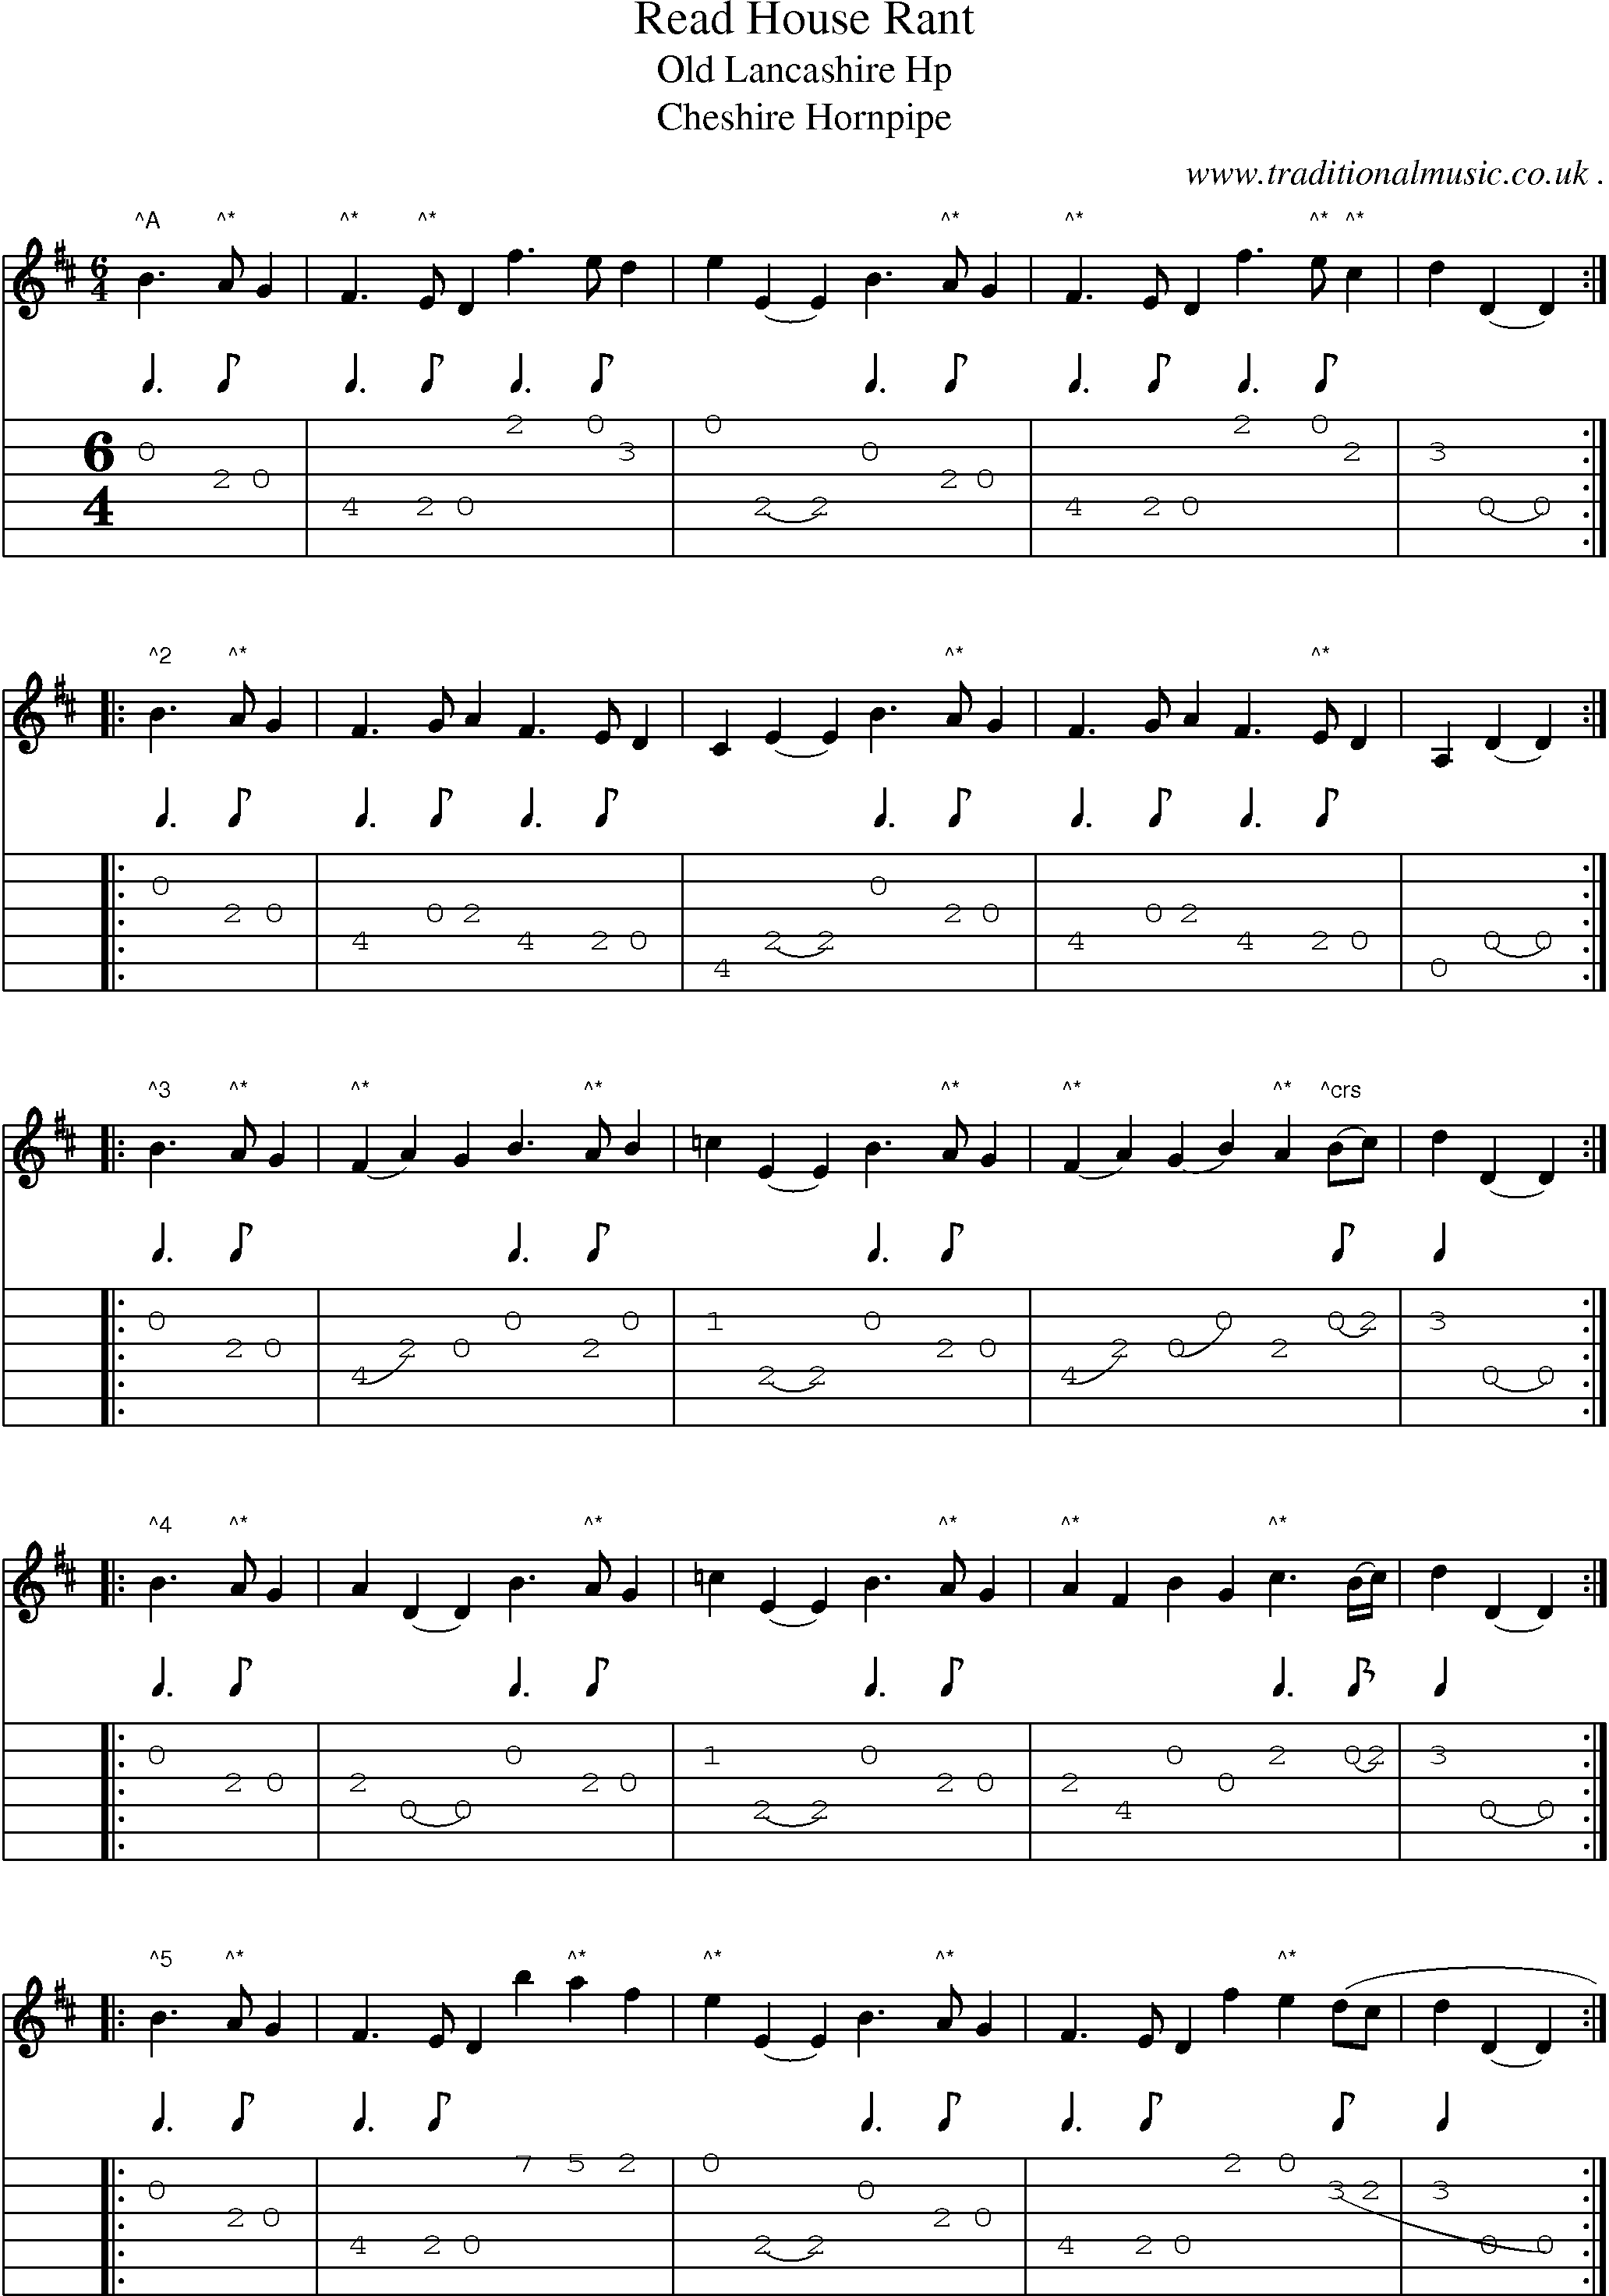 Sheet-Music and Guitar Tabs for Read House Rant